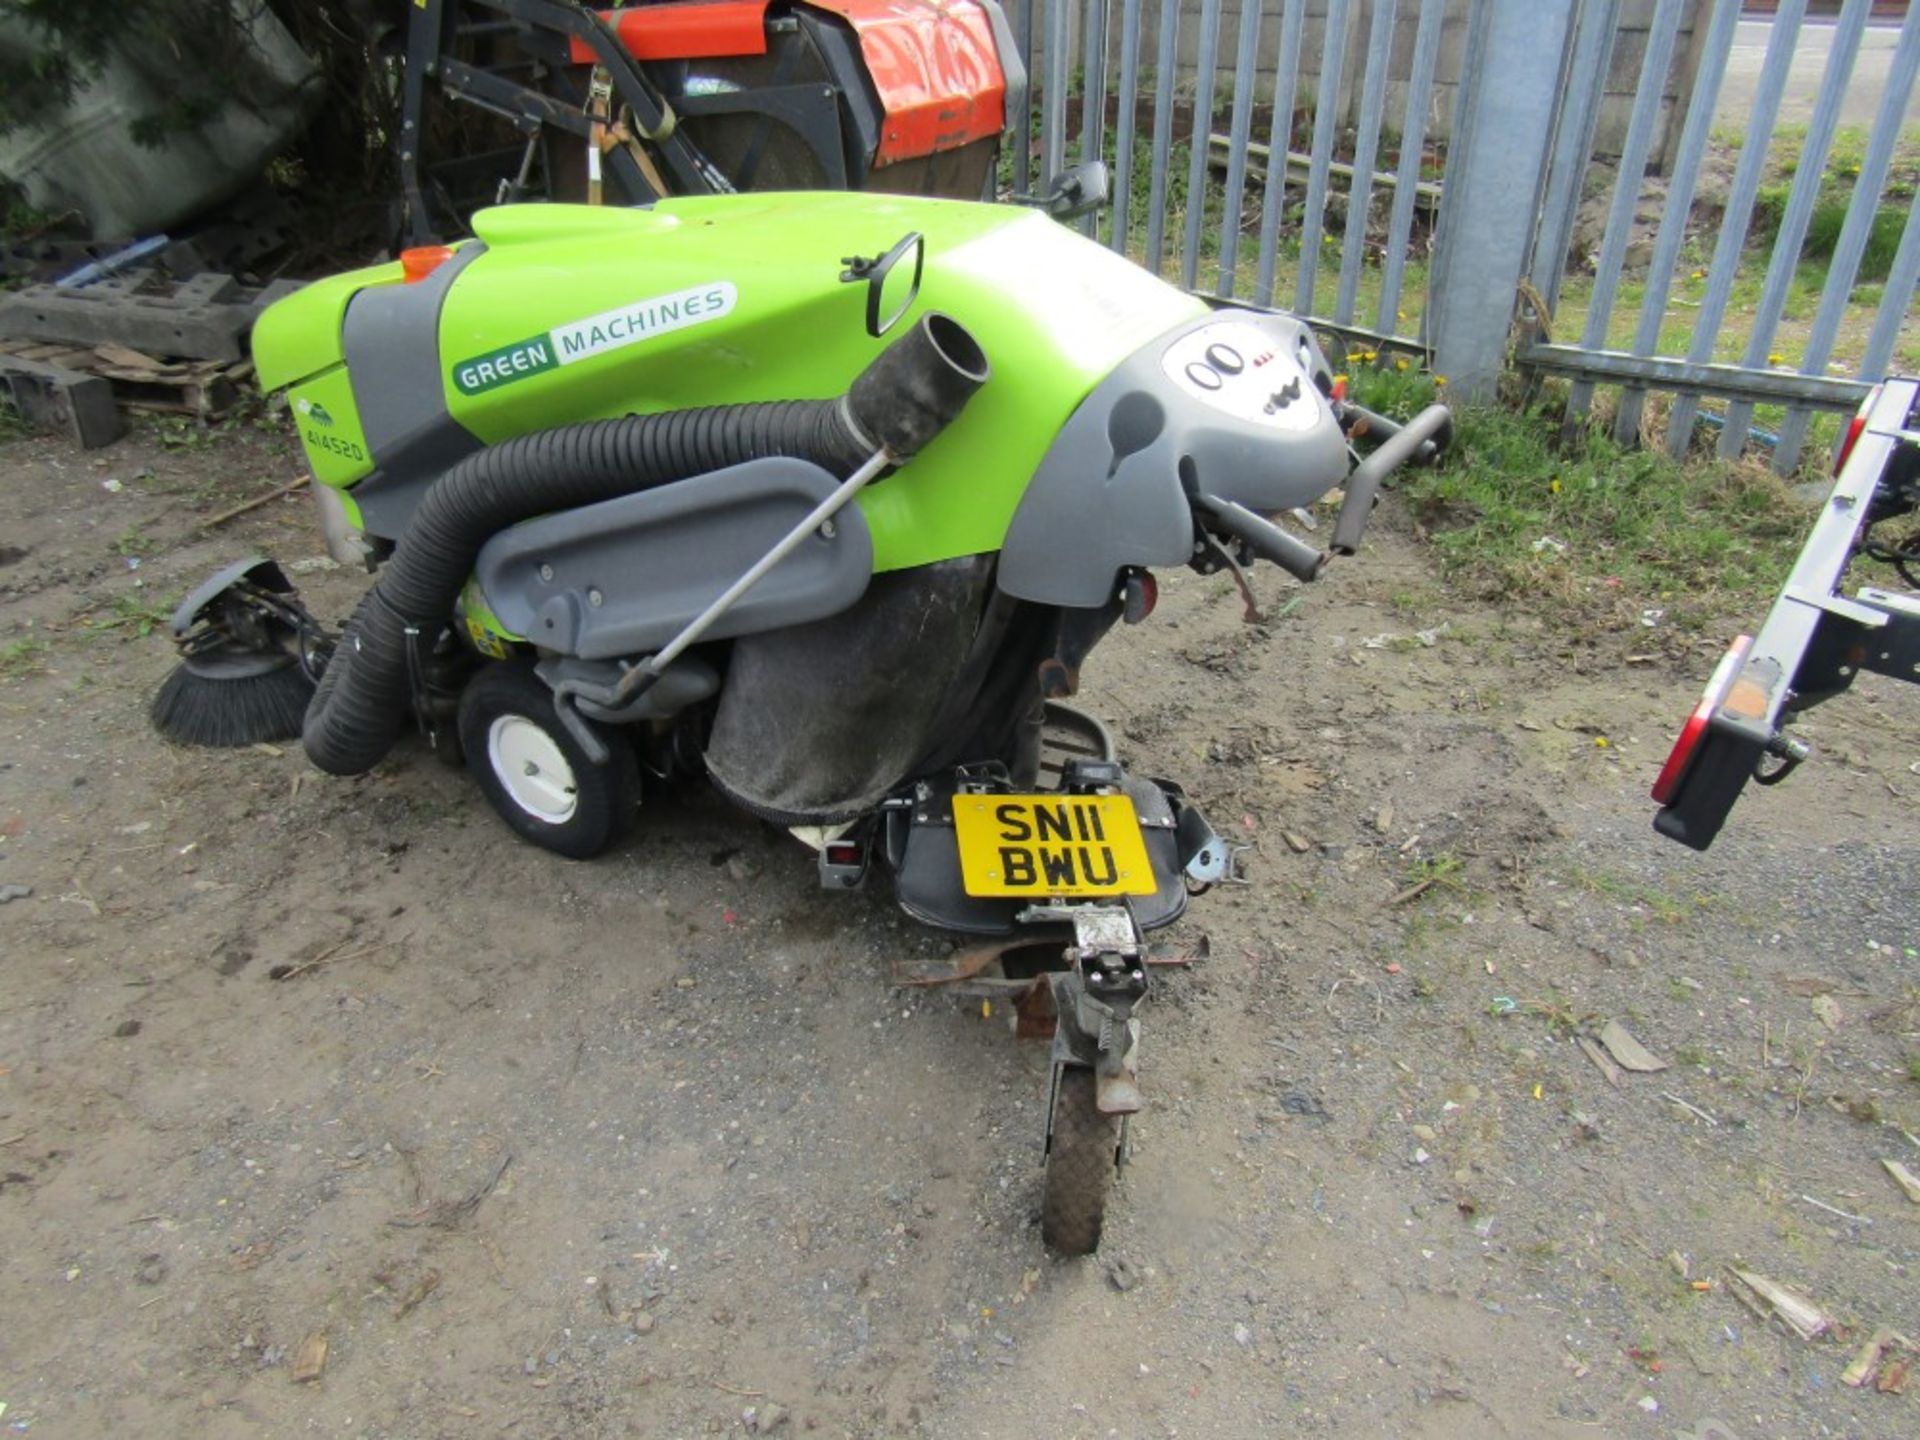 11 reg GREEN MACHINE 414S2D STREET CLEANING RIDE ON TRICYCLE, 1ST REG 05/11, 204 HOURS WARRANTED, V5 - Bild 2 aus 3